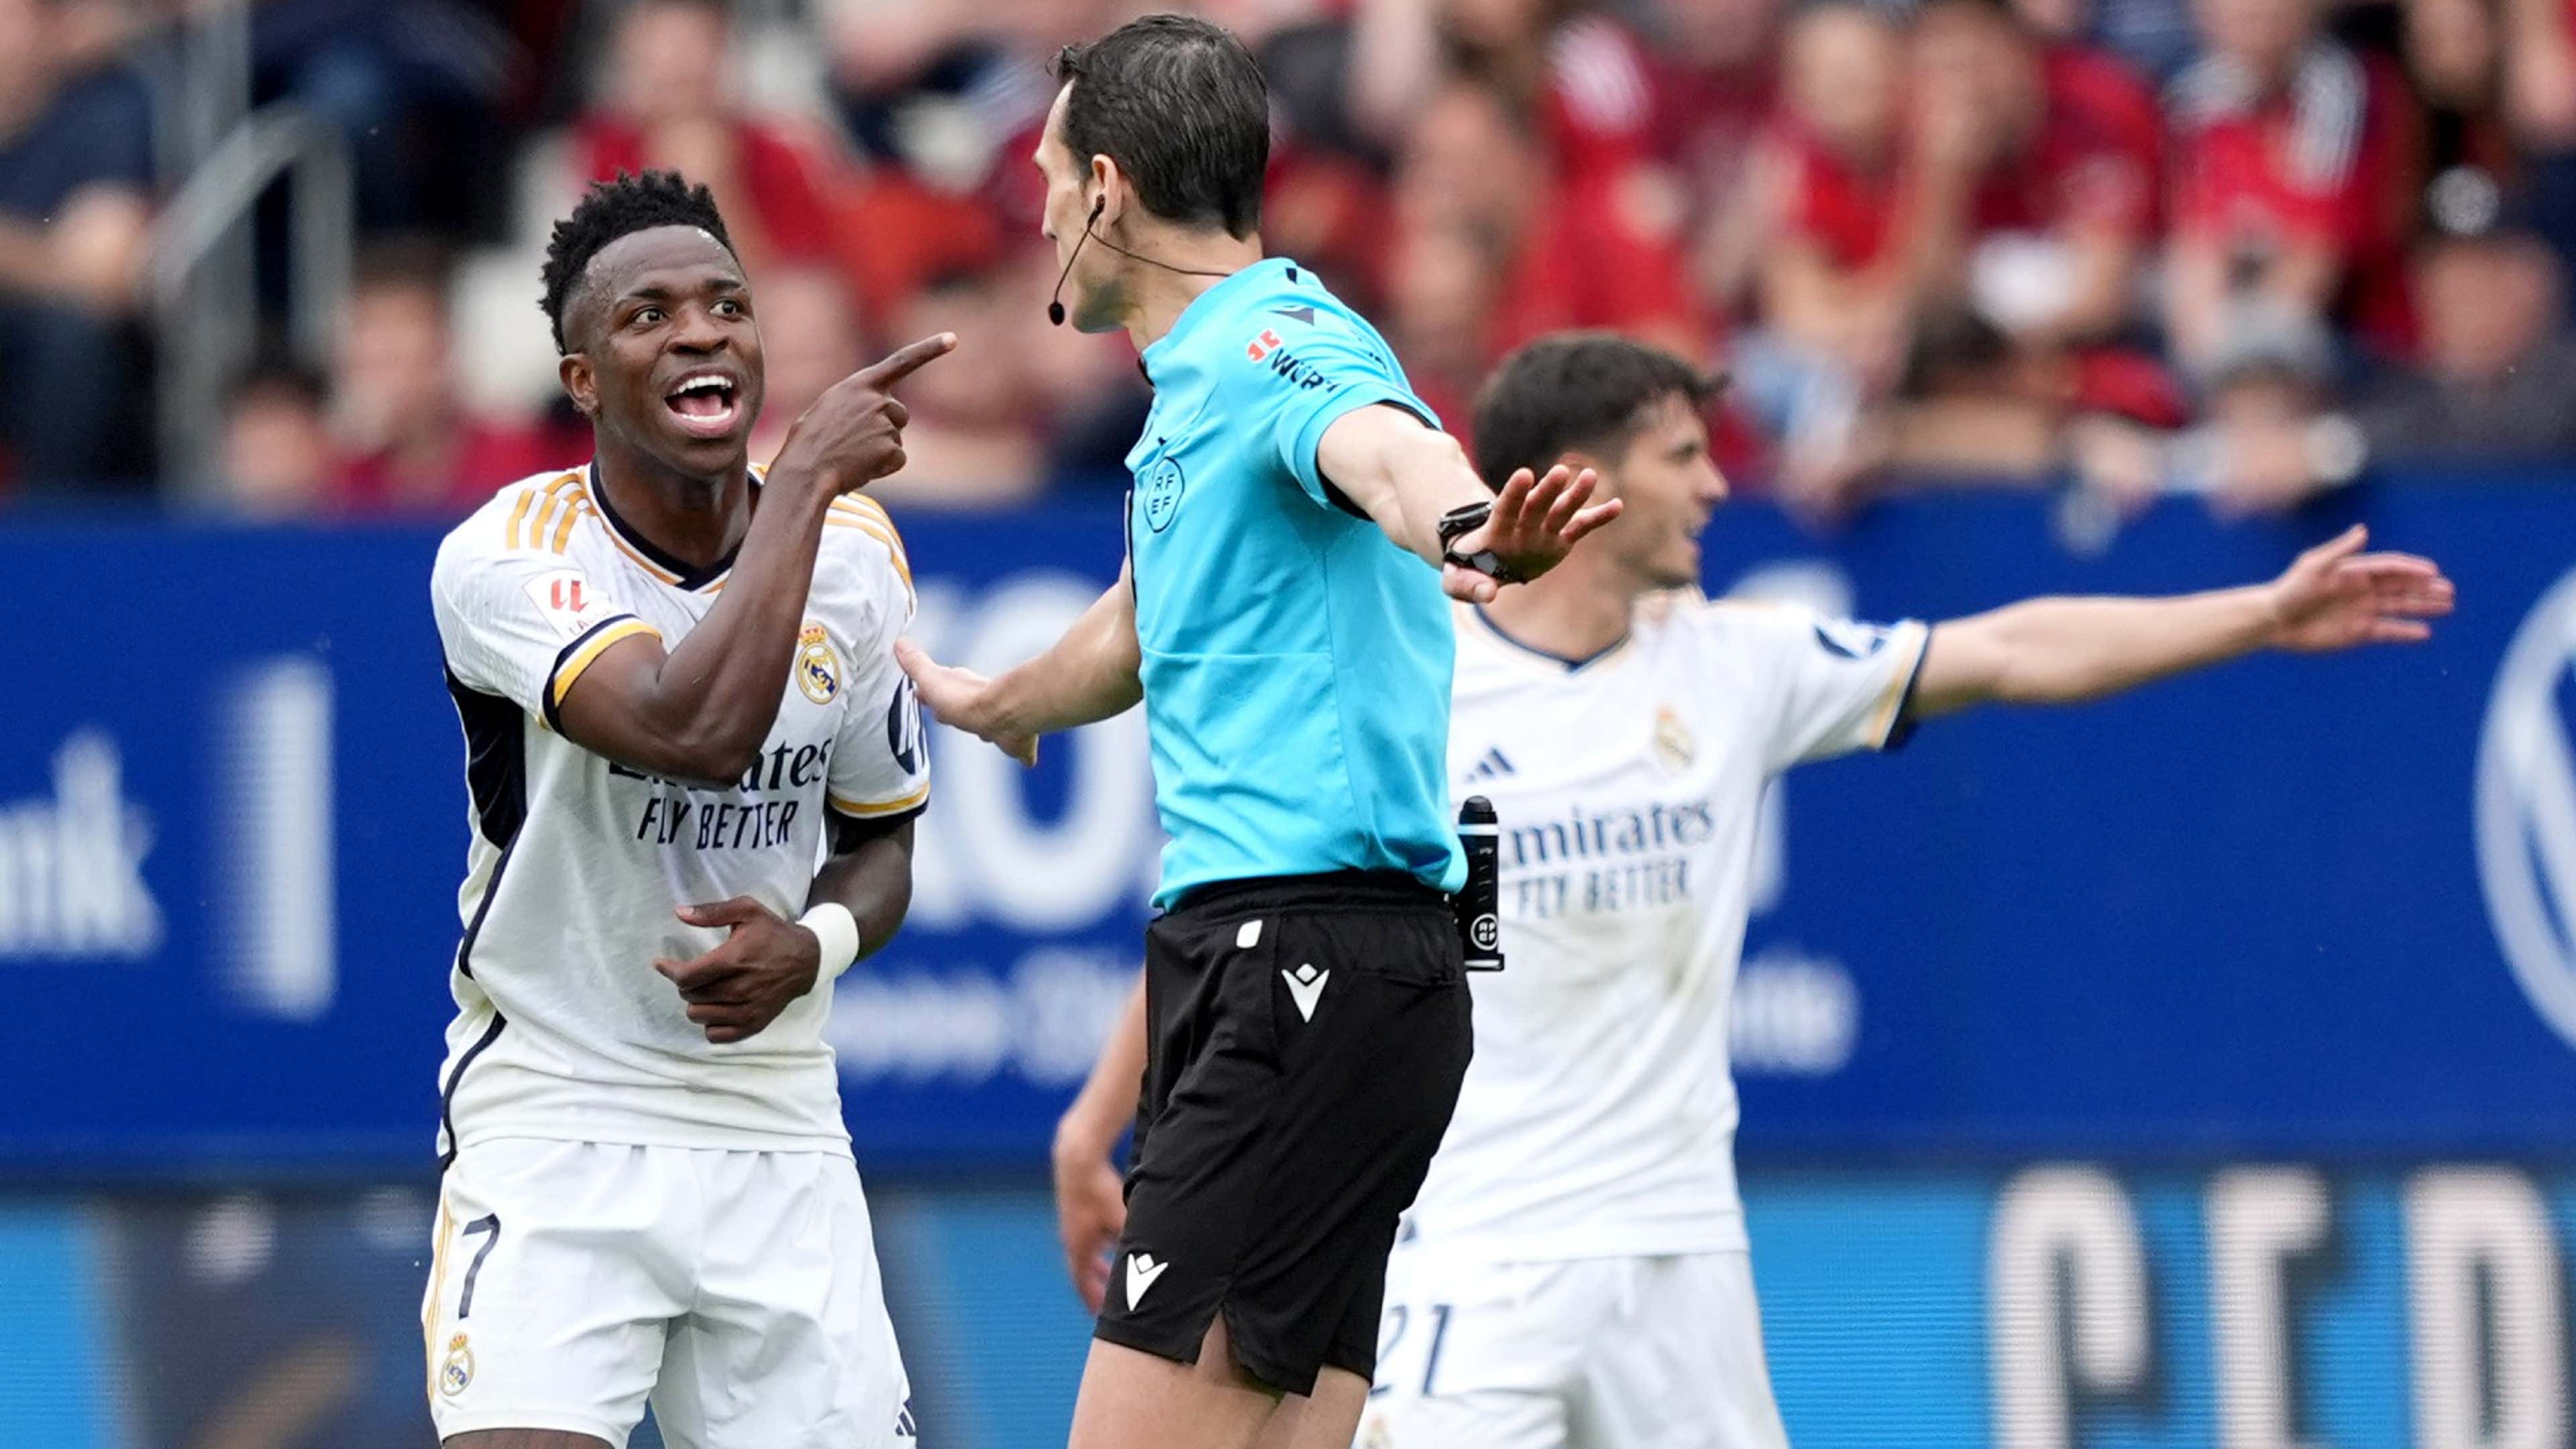 Vinicius Jr: The most important player in football